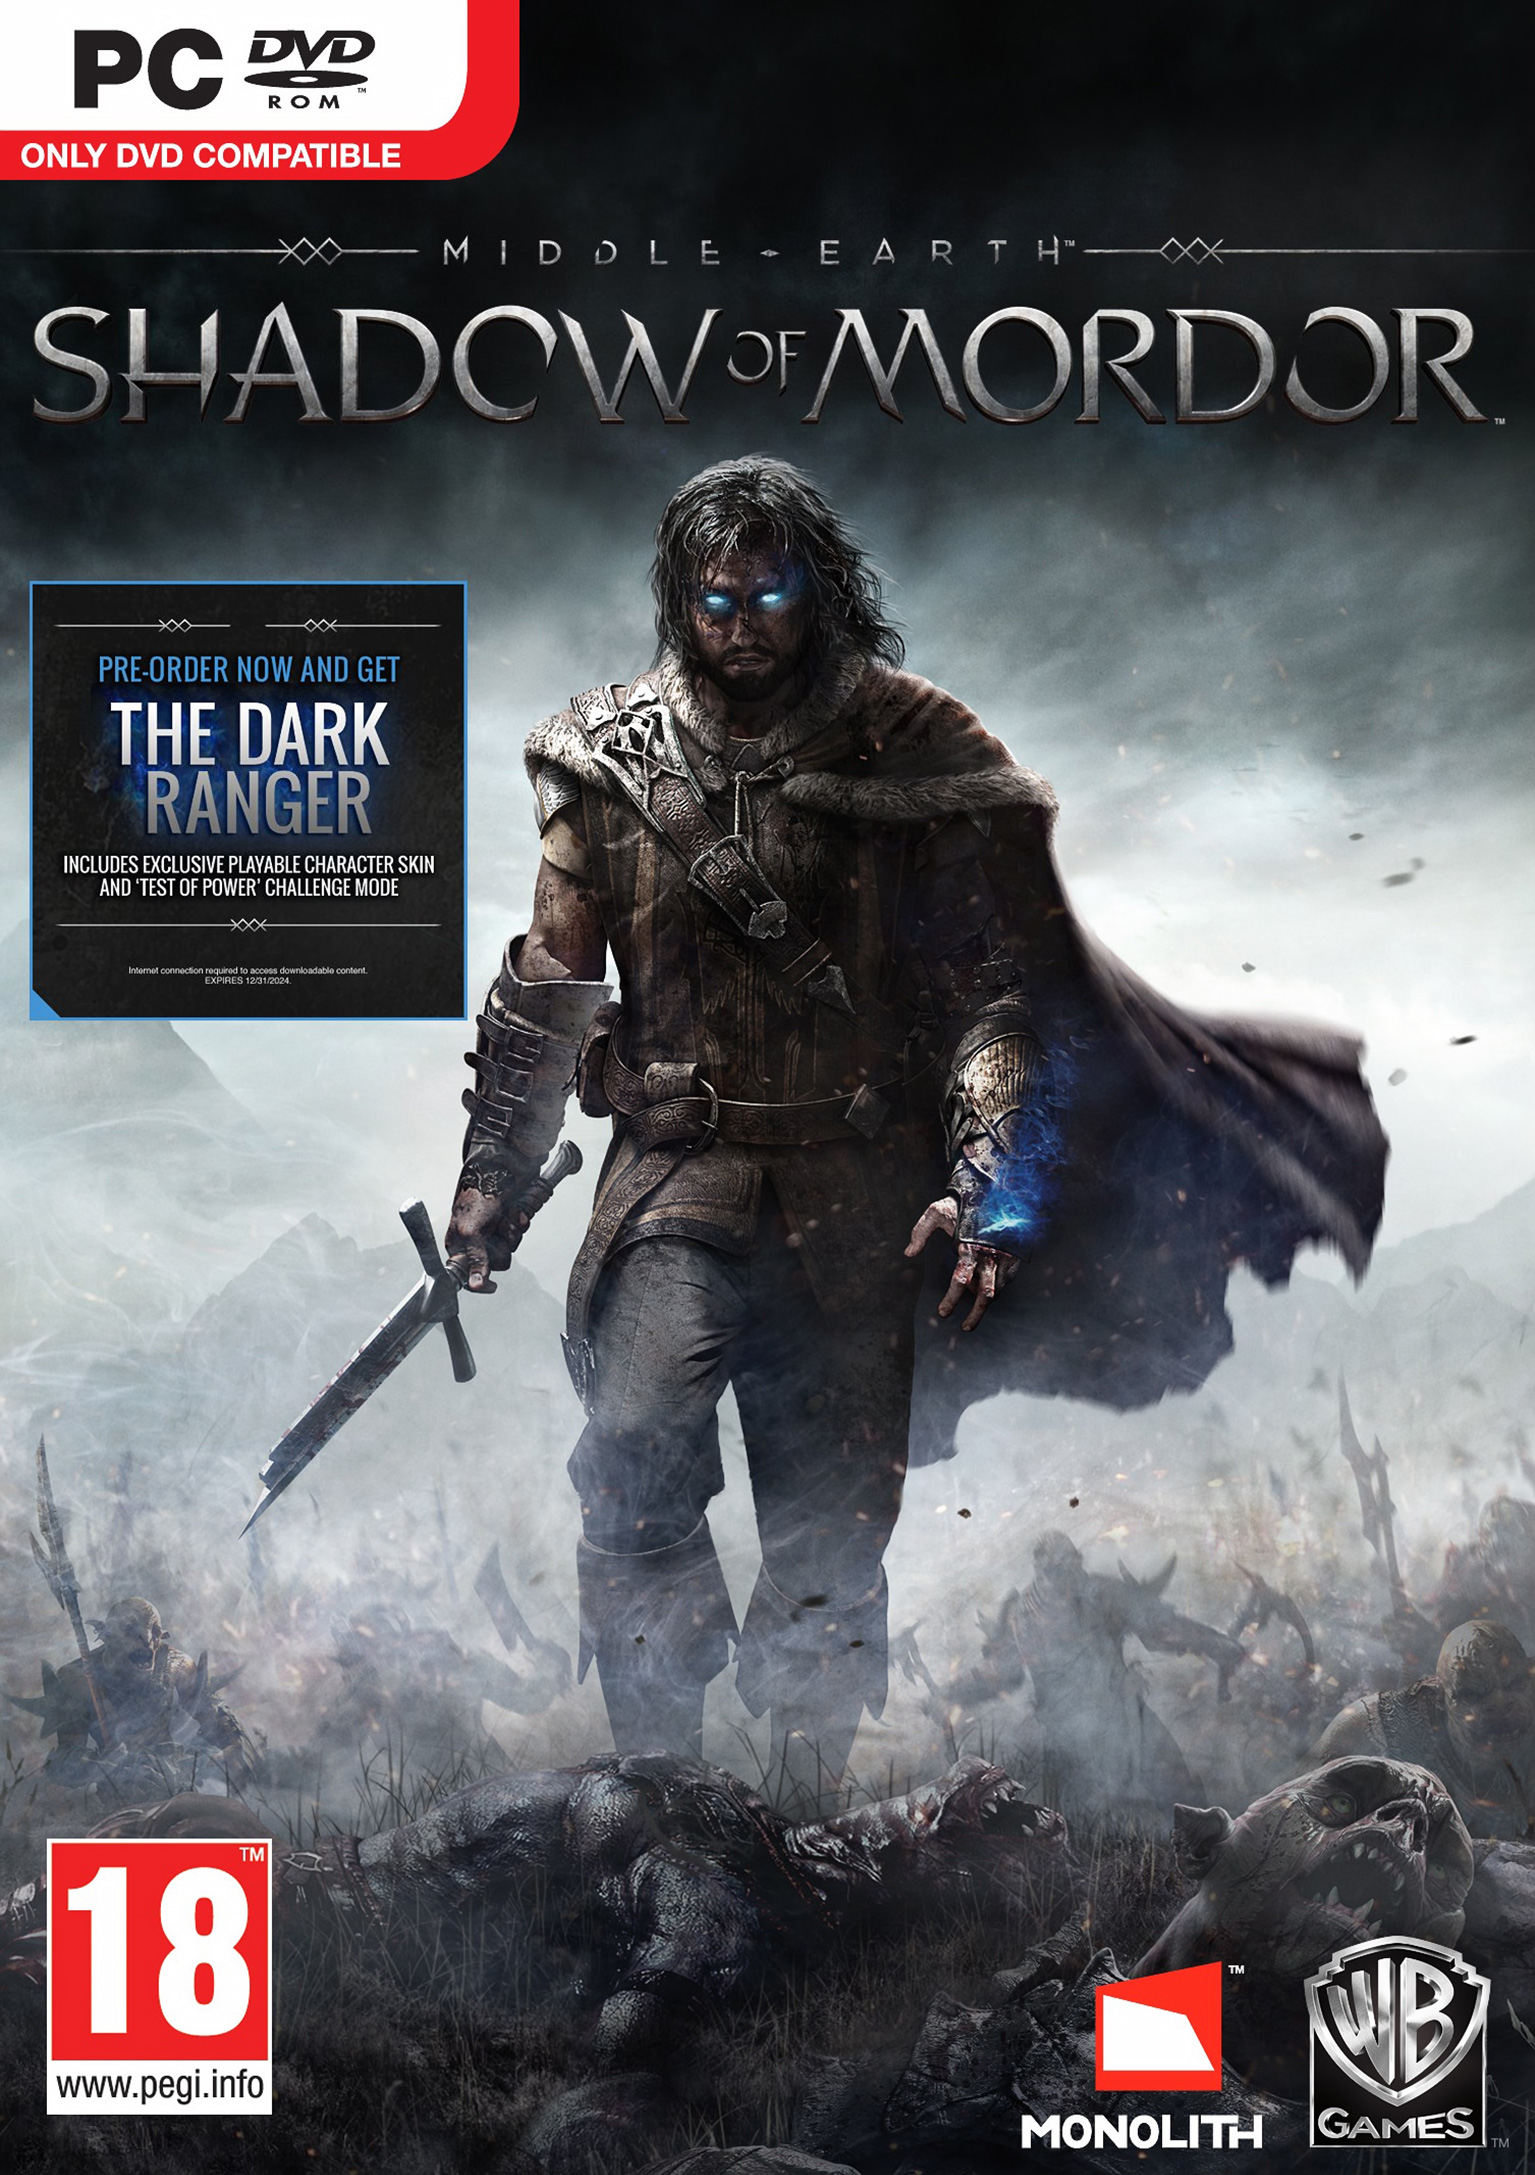 Middle-earth: Shadow of Mordor - predn DVD obal